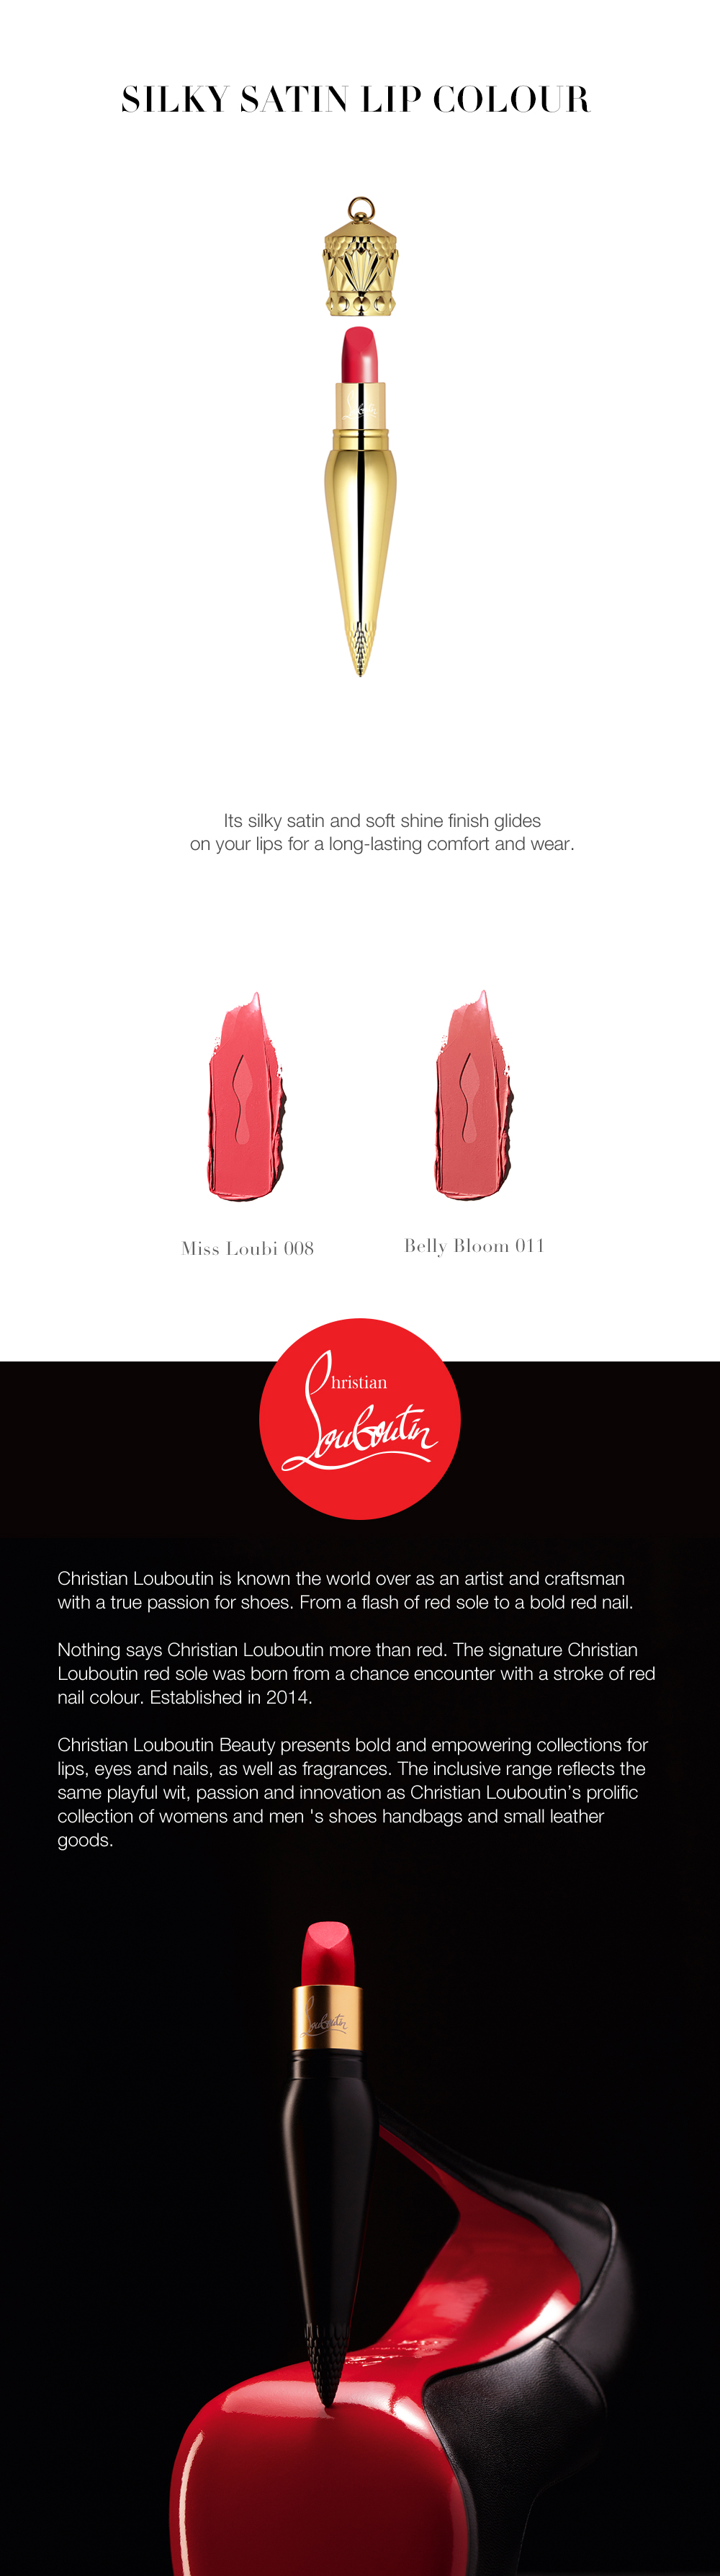 Christian Louboutin Silky Satin Lip Colour in Belly Bloom review